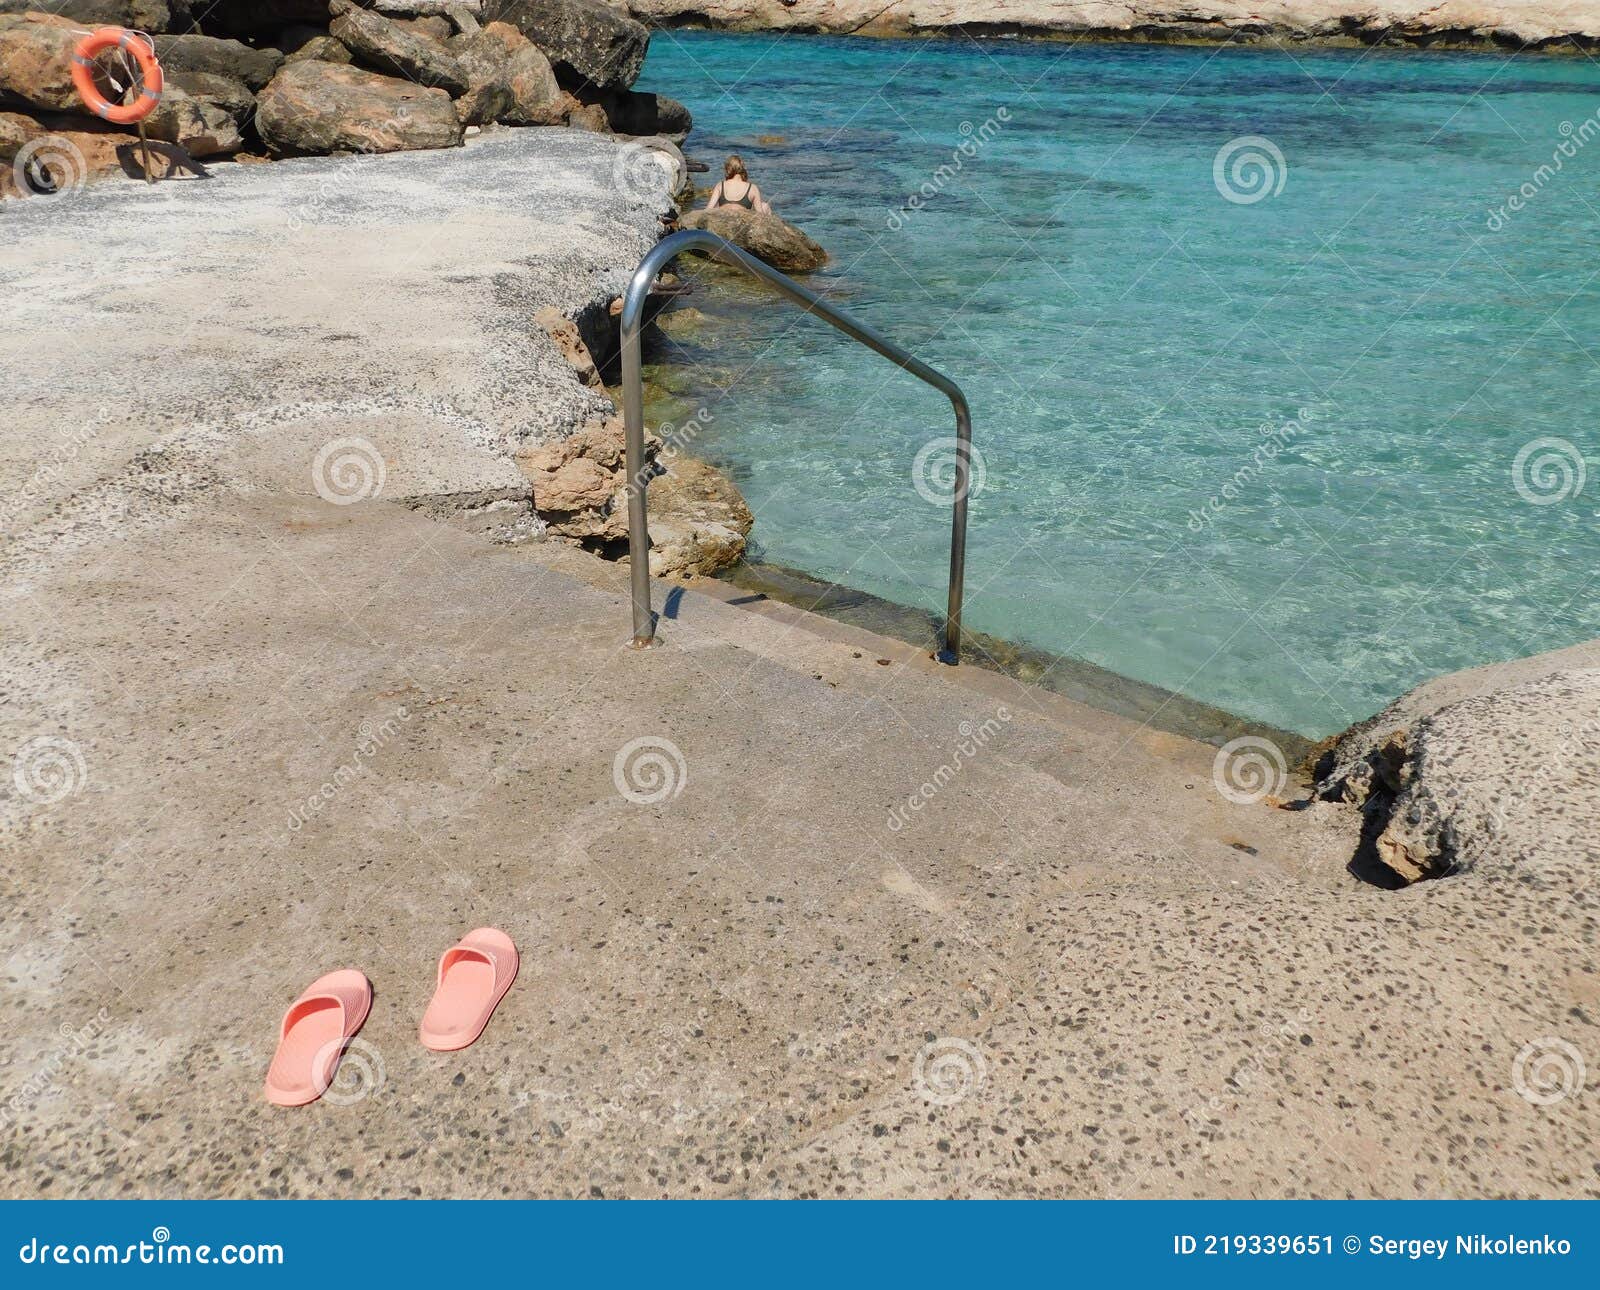 A Pair of Flip-flops Stuck on the Sand of a Beach Stock Image - Image ...